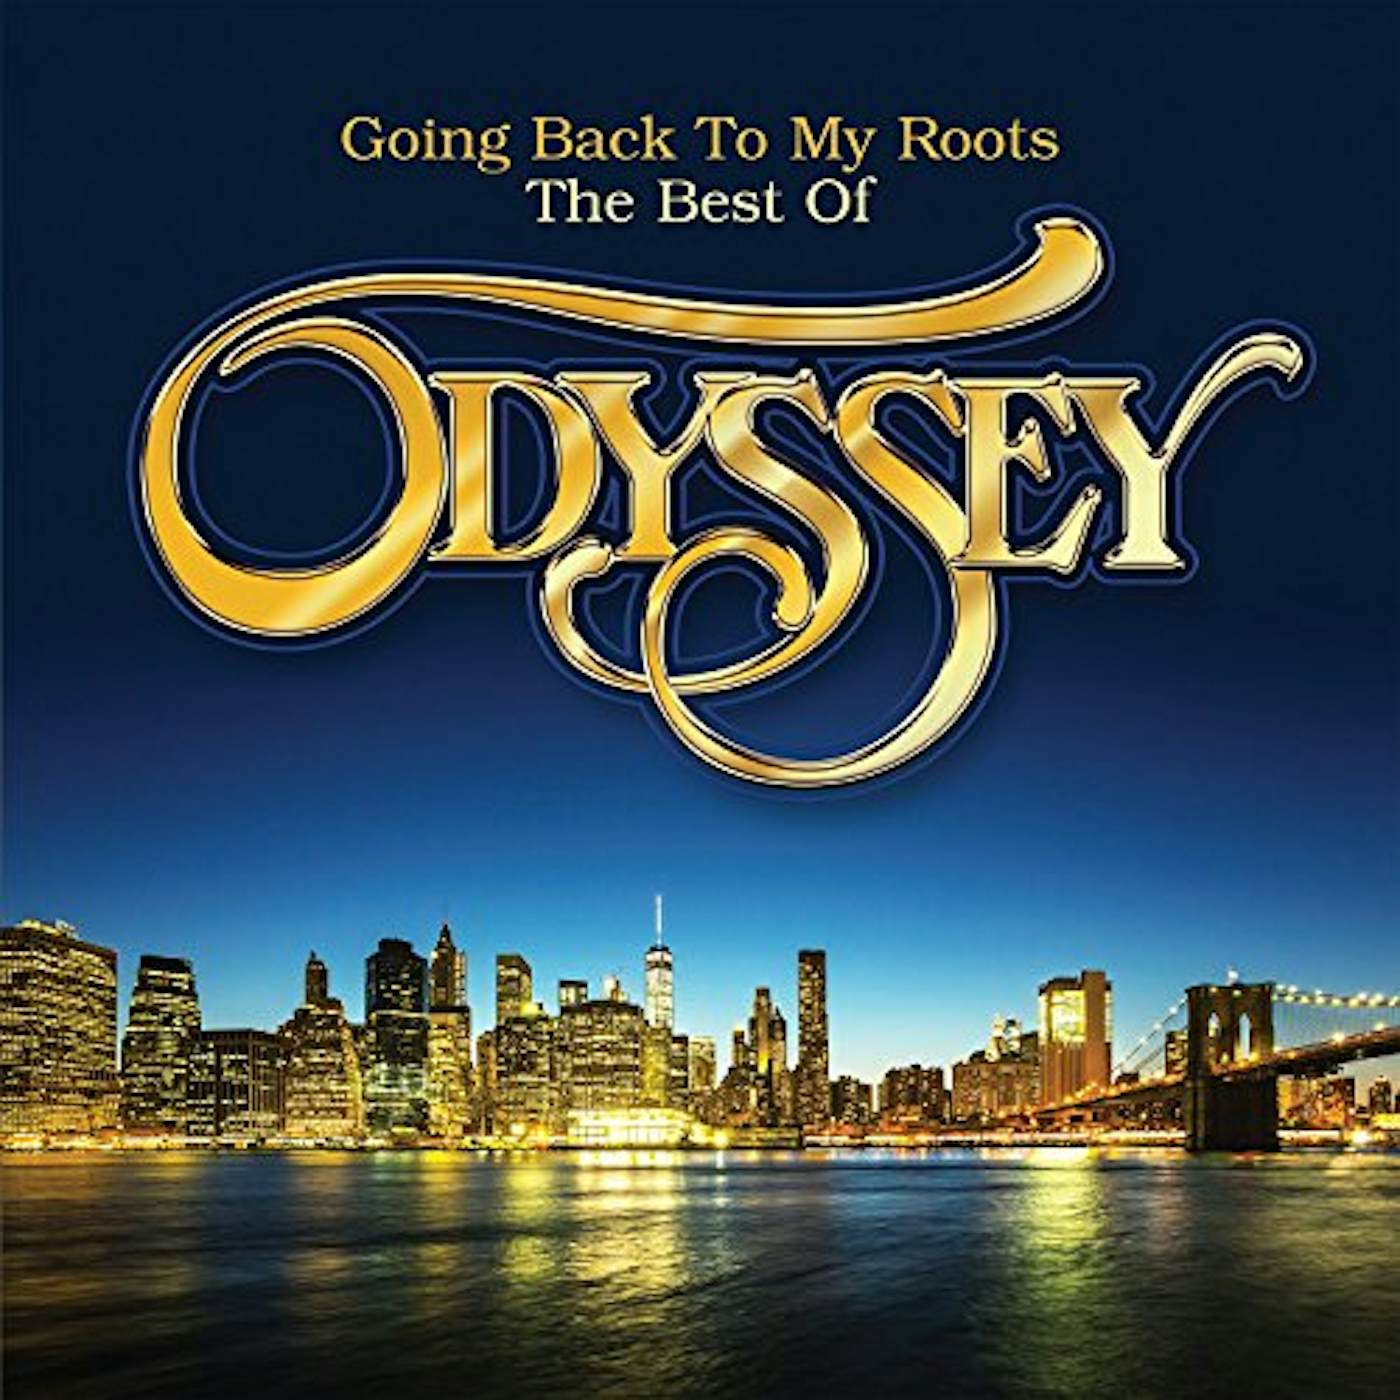 Odyssey GOING BACK TO MY ROOTS: BEST OF CD